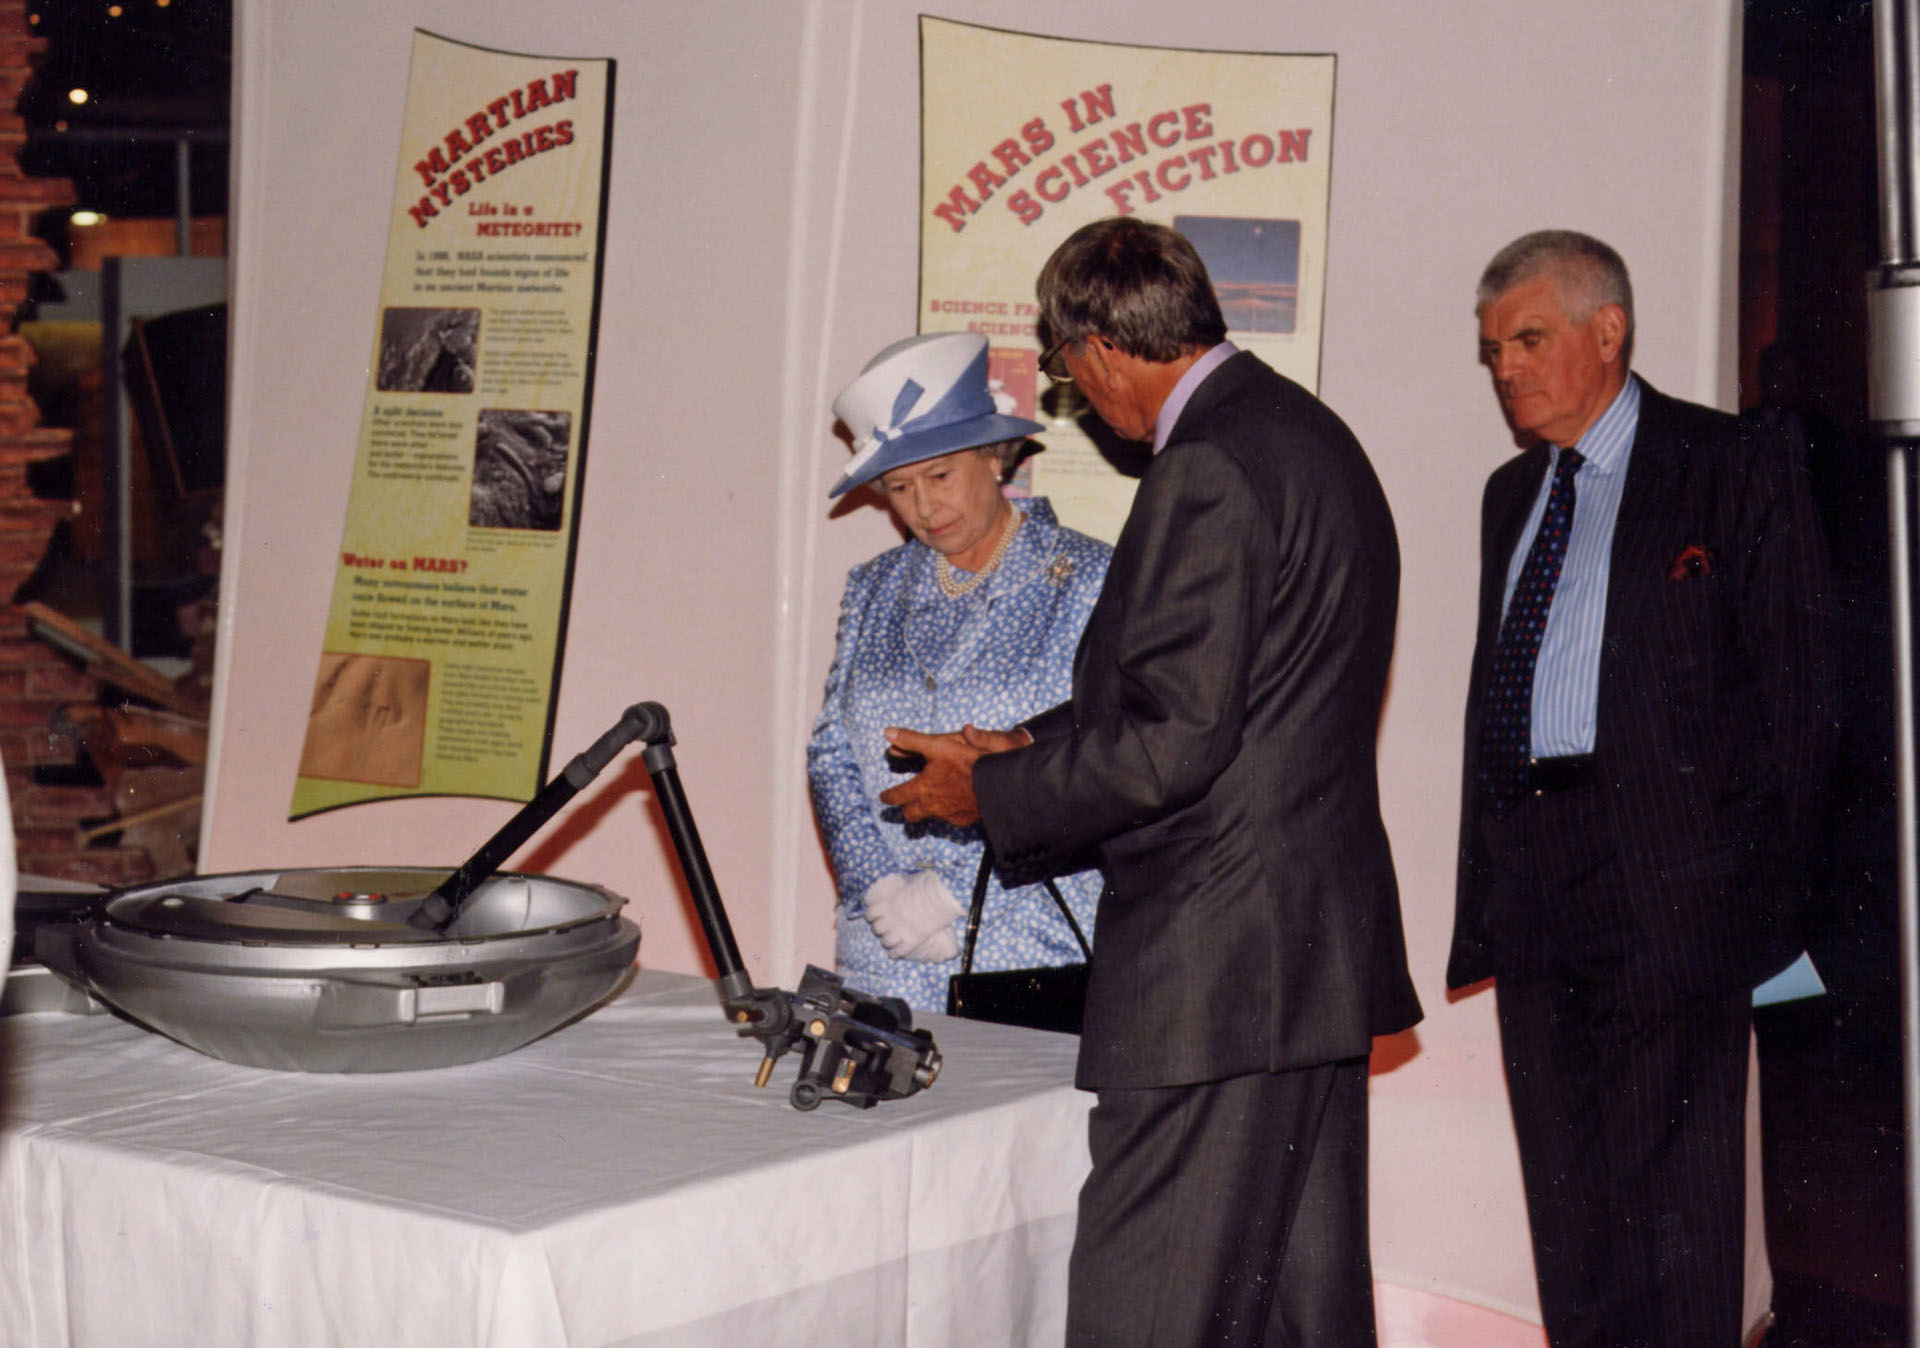 The Queen being shown an exhibit at The National Space Centre, 2002 - Picture Courtesy of The National Space Centre